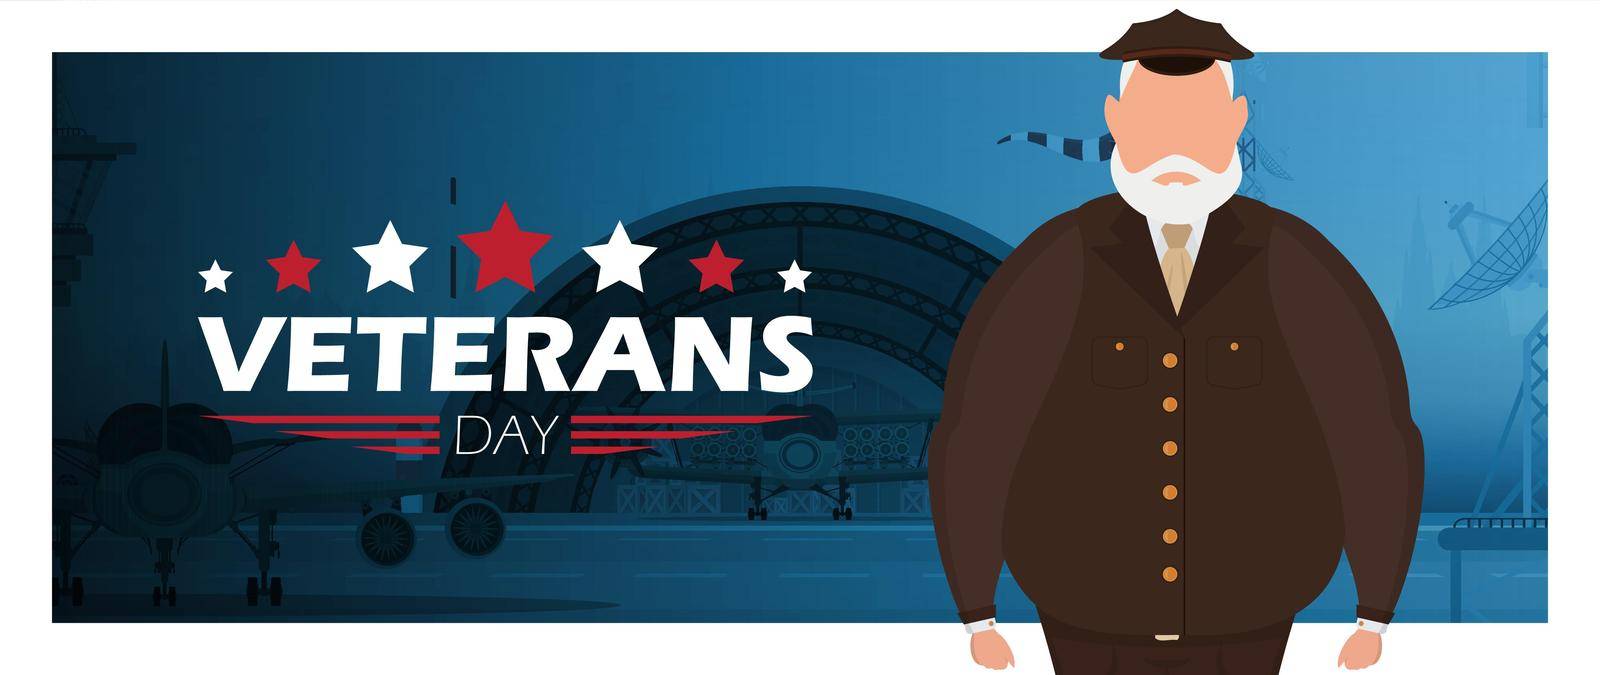 Veterans day banner with a wished man in uniform. Cartoon style.